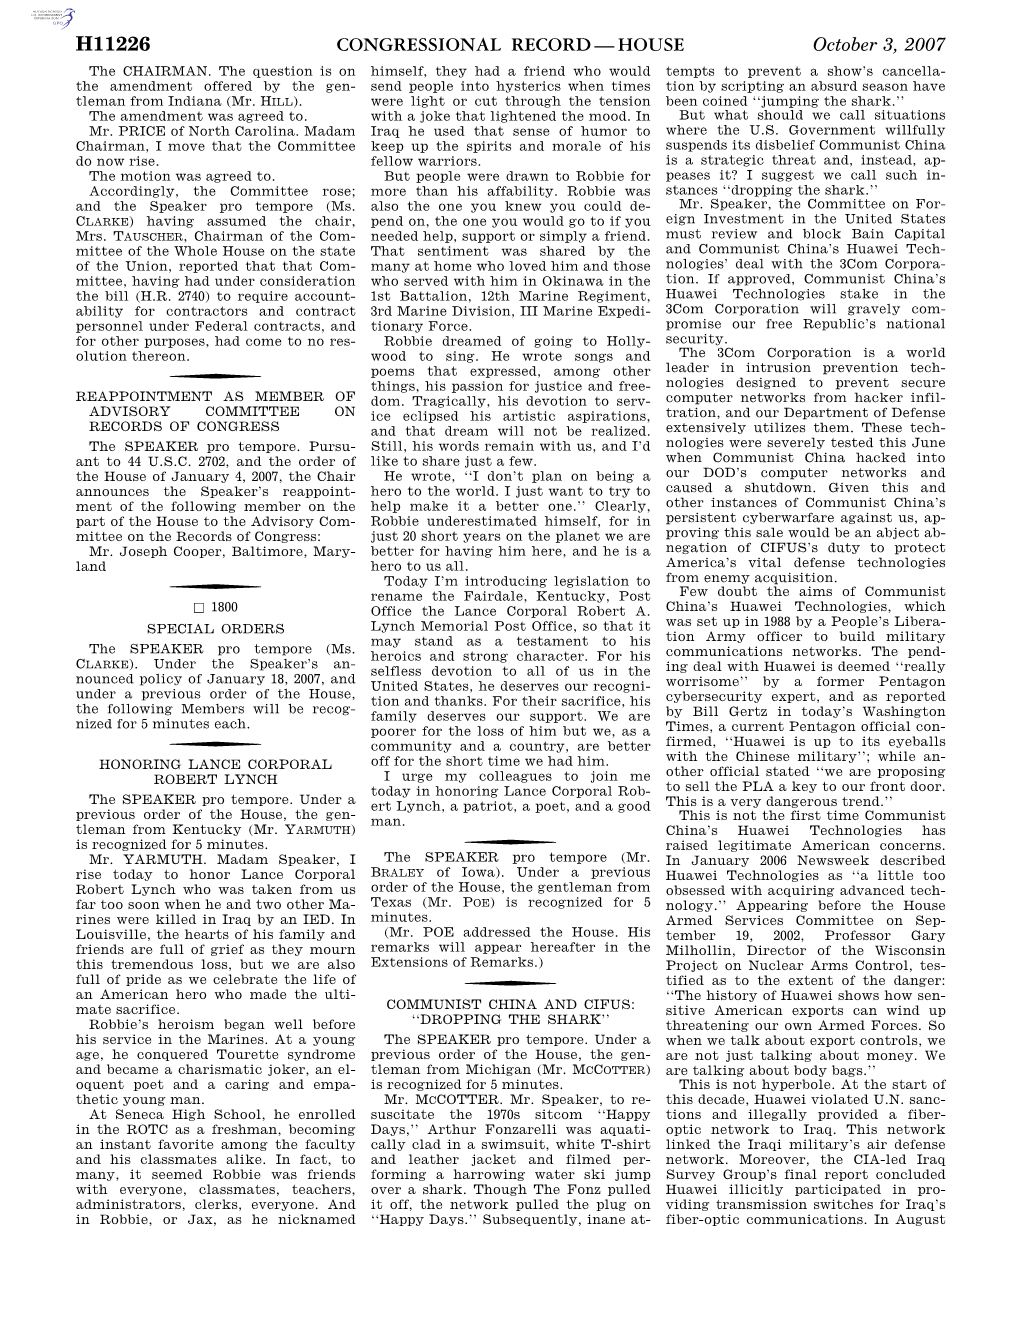 Congressional Record—House H11226